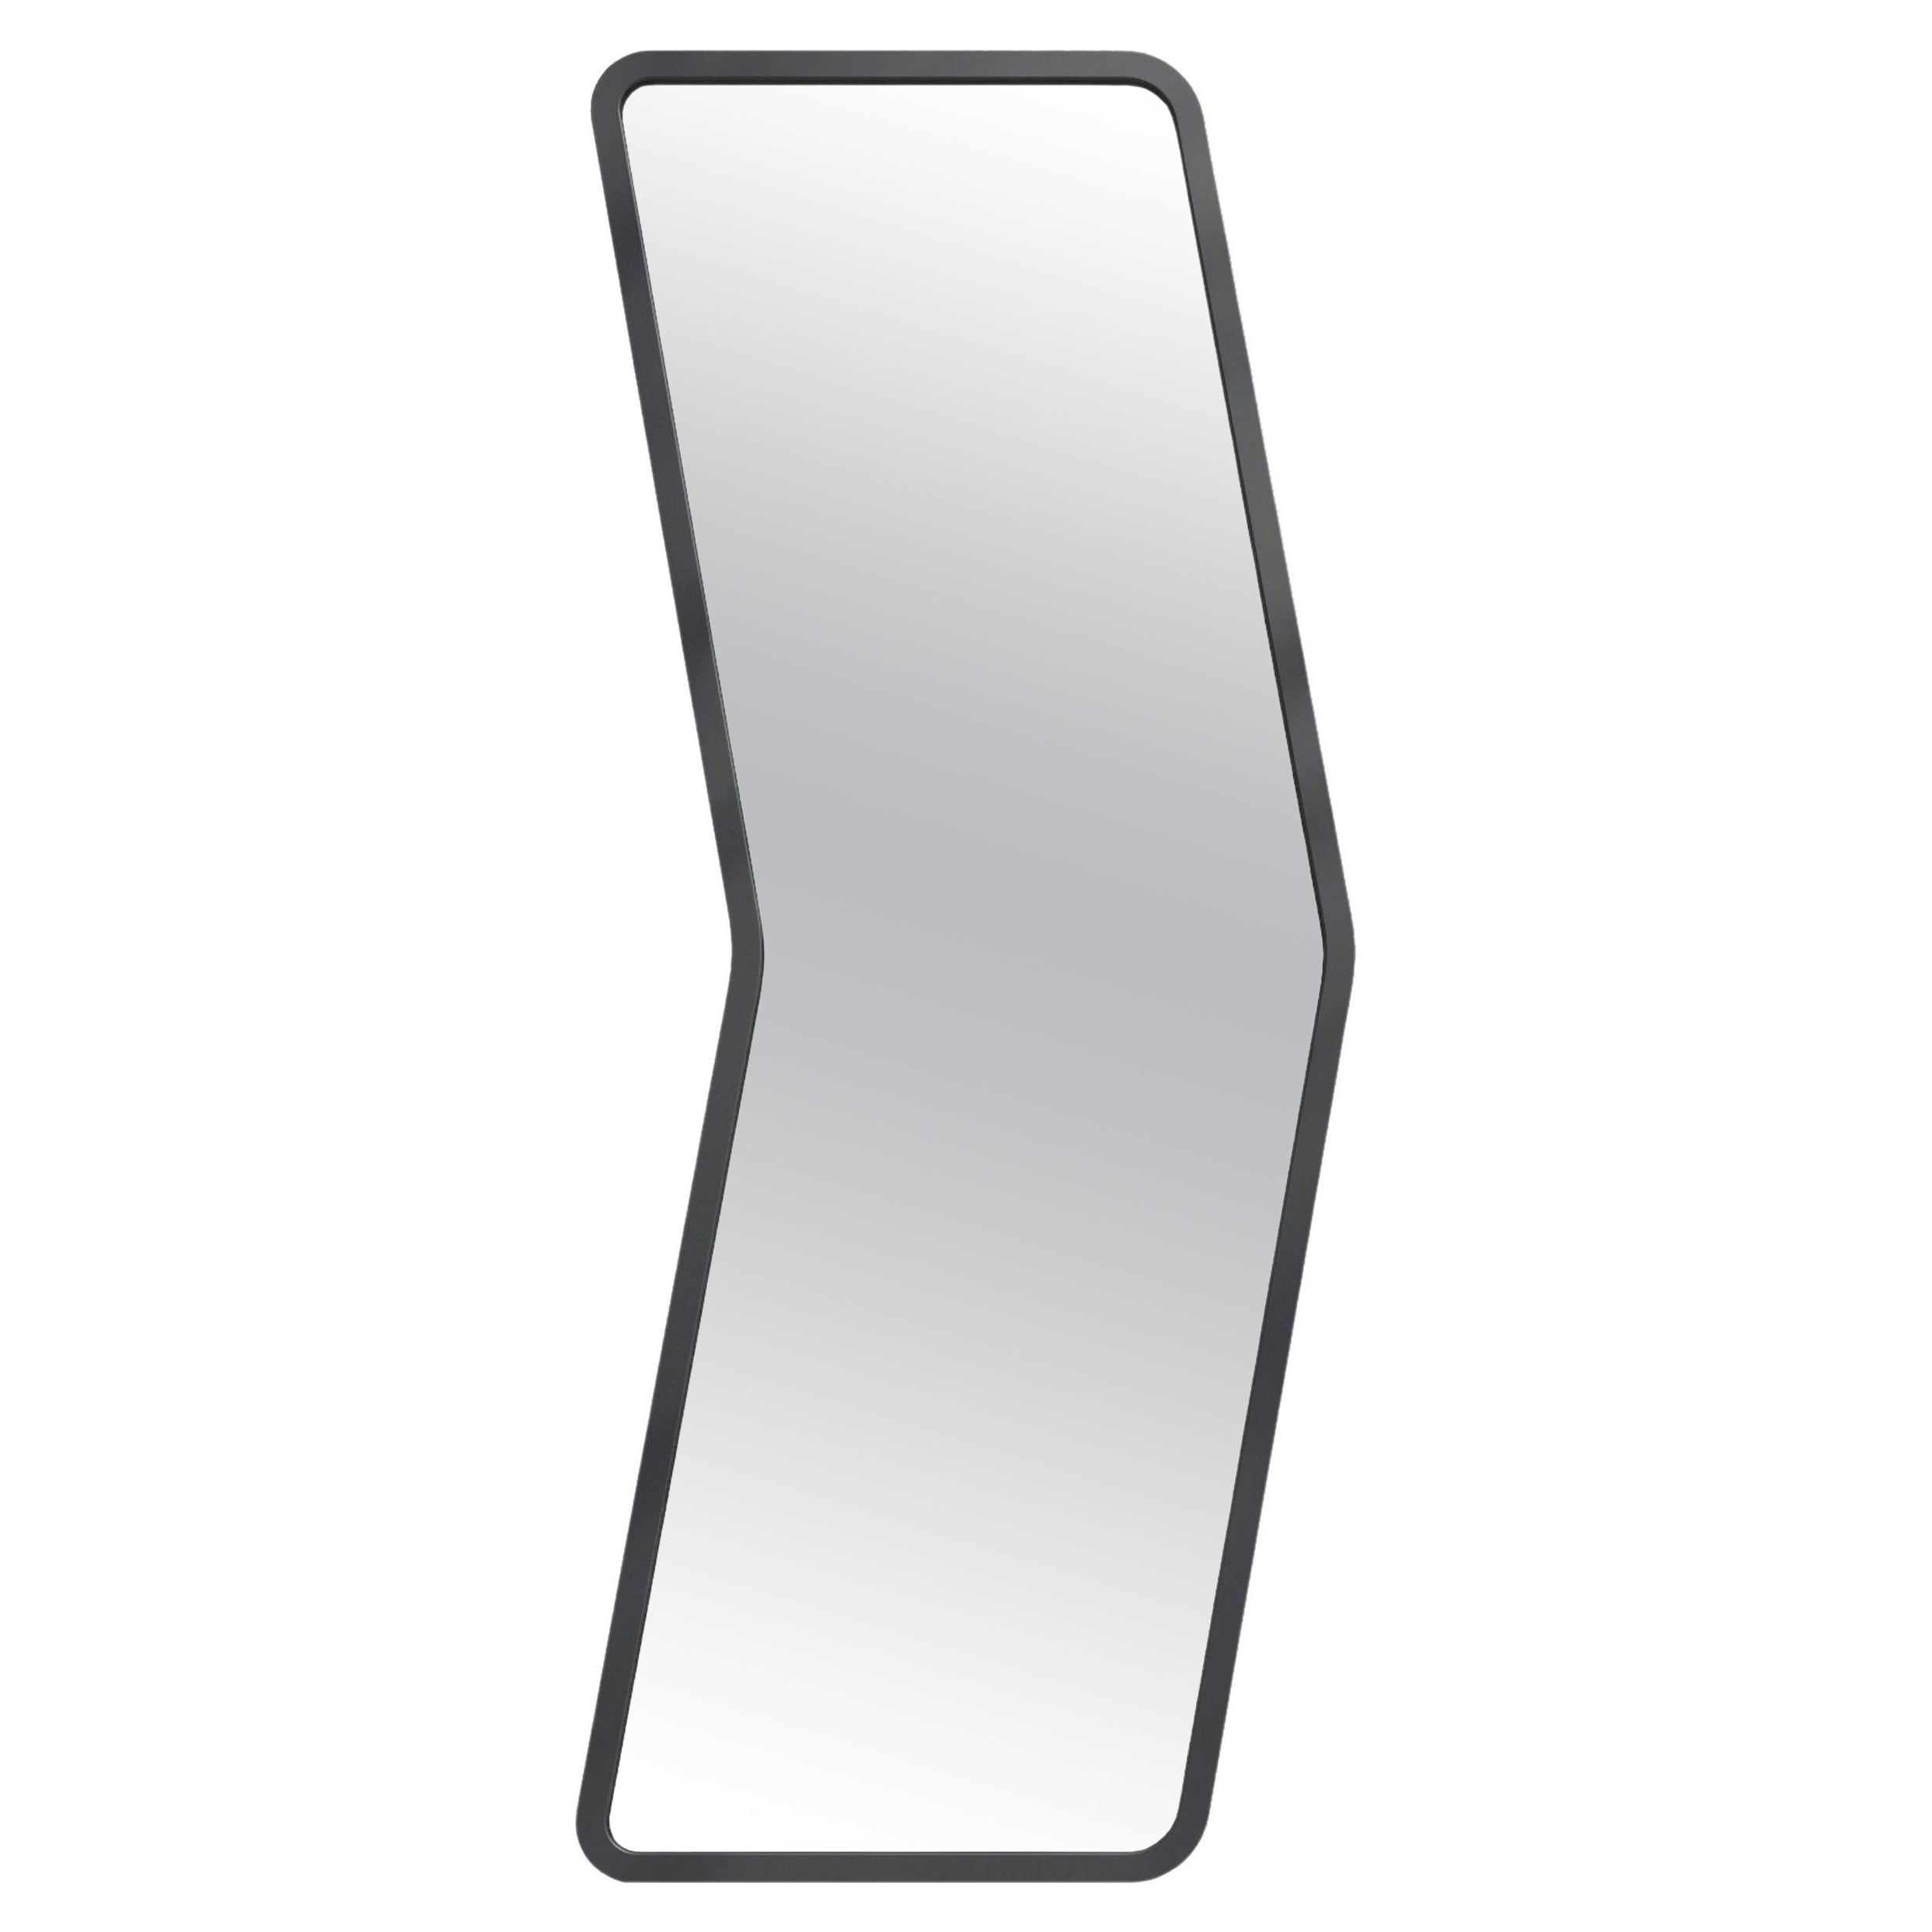 "Arrow 6" Full Length Mirror (any color) by oitoproducts